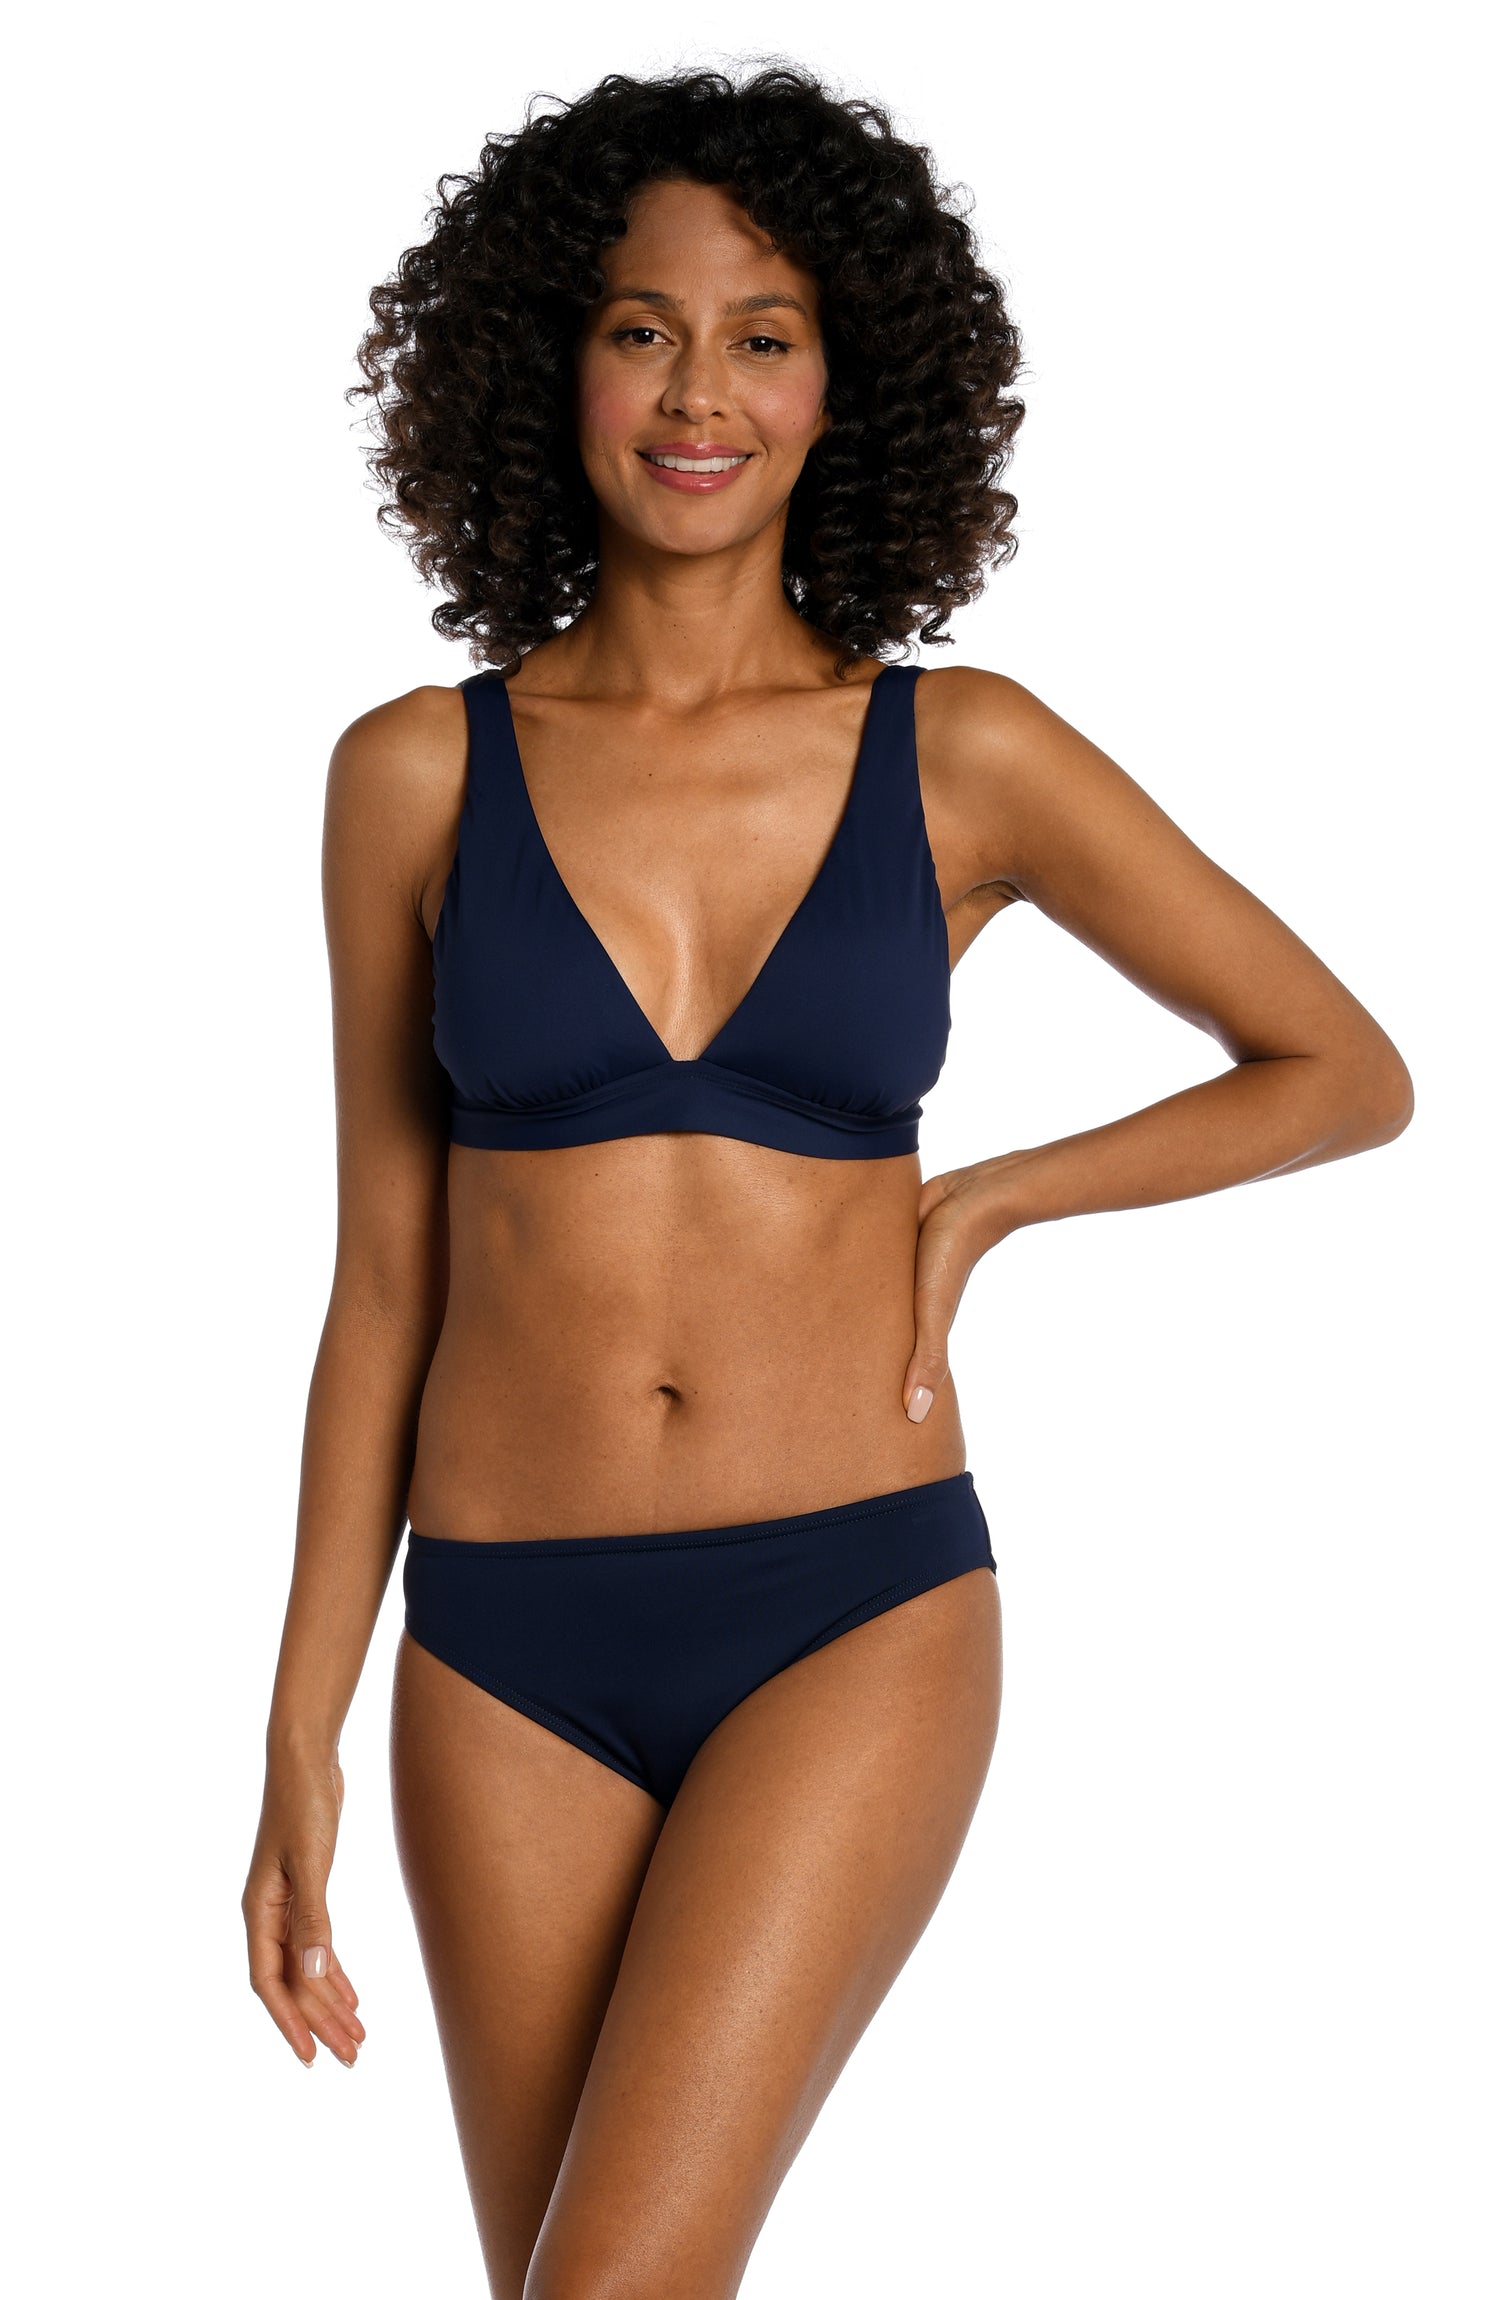 Model is wearing a indigo colored tall triangle swimsuit top from our Best-Selling Island Goddess collection.